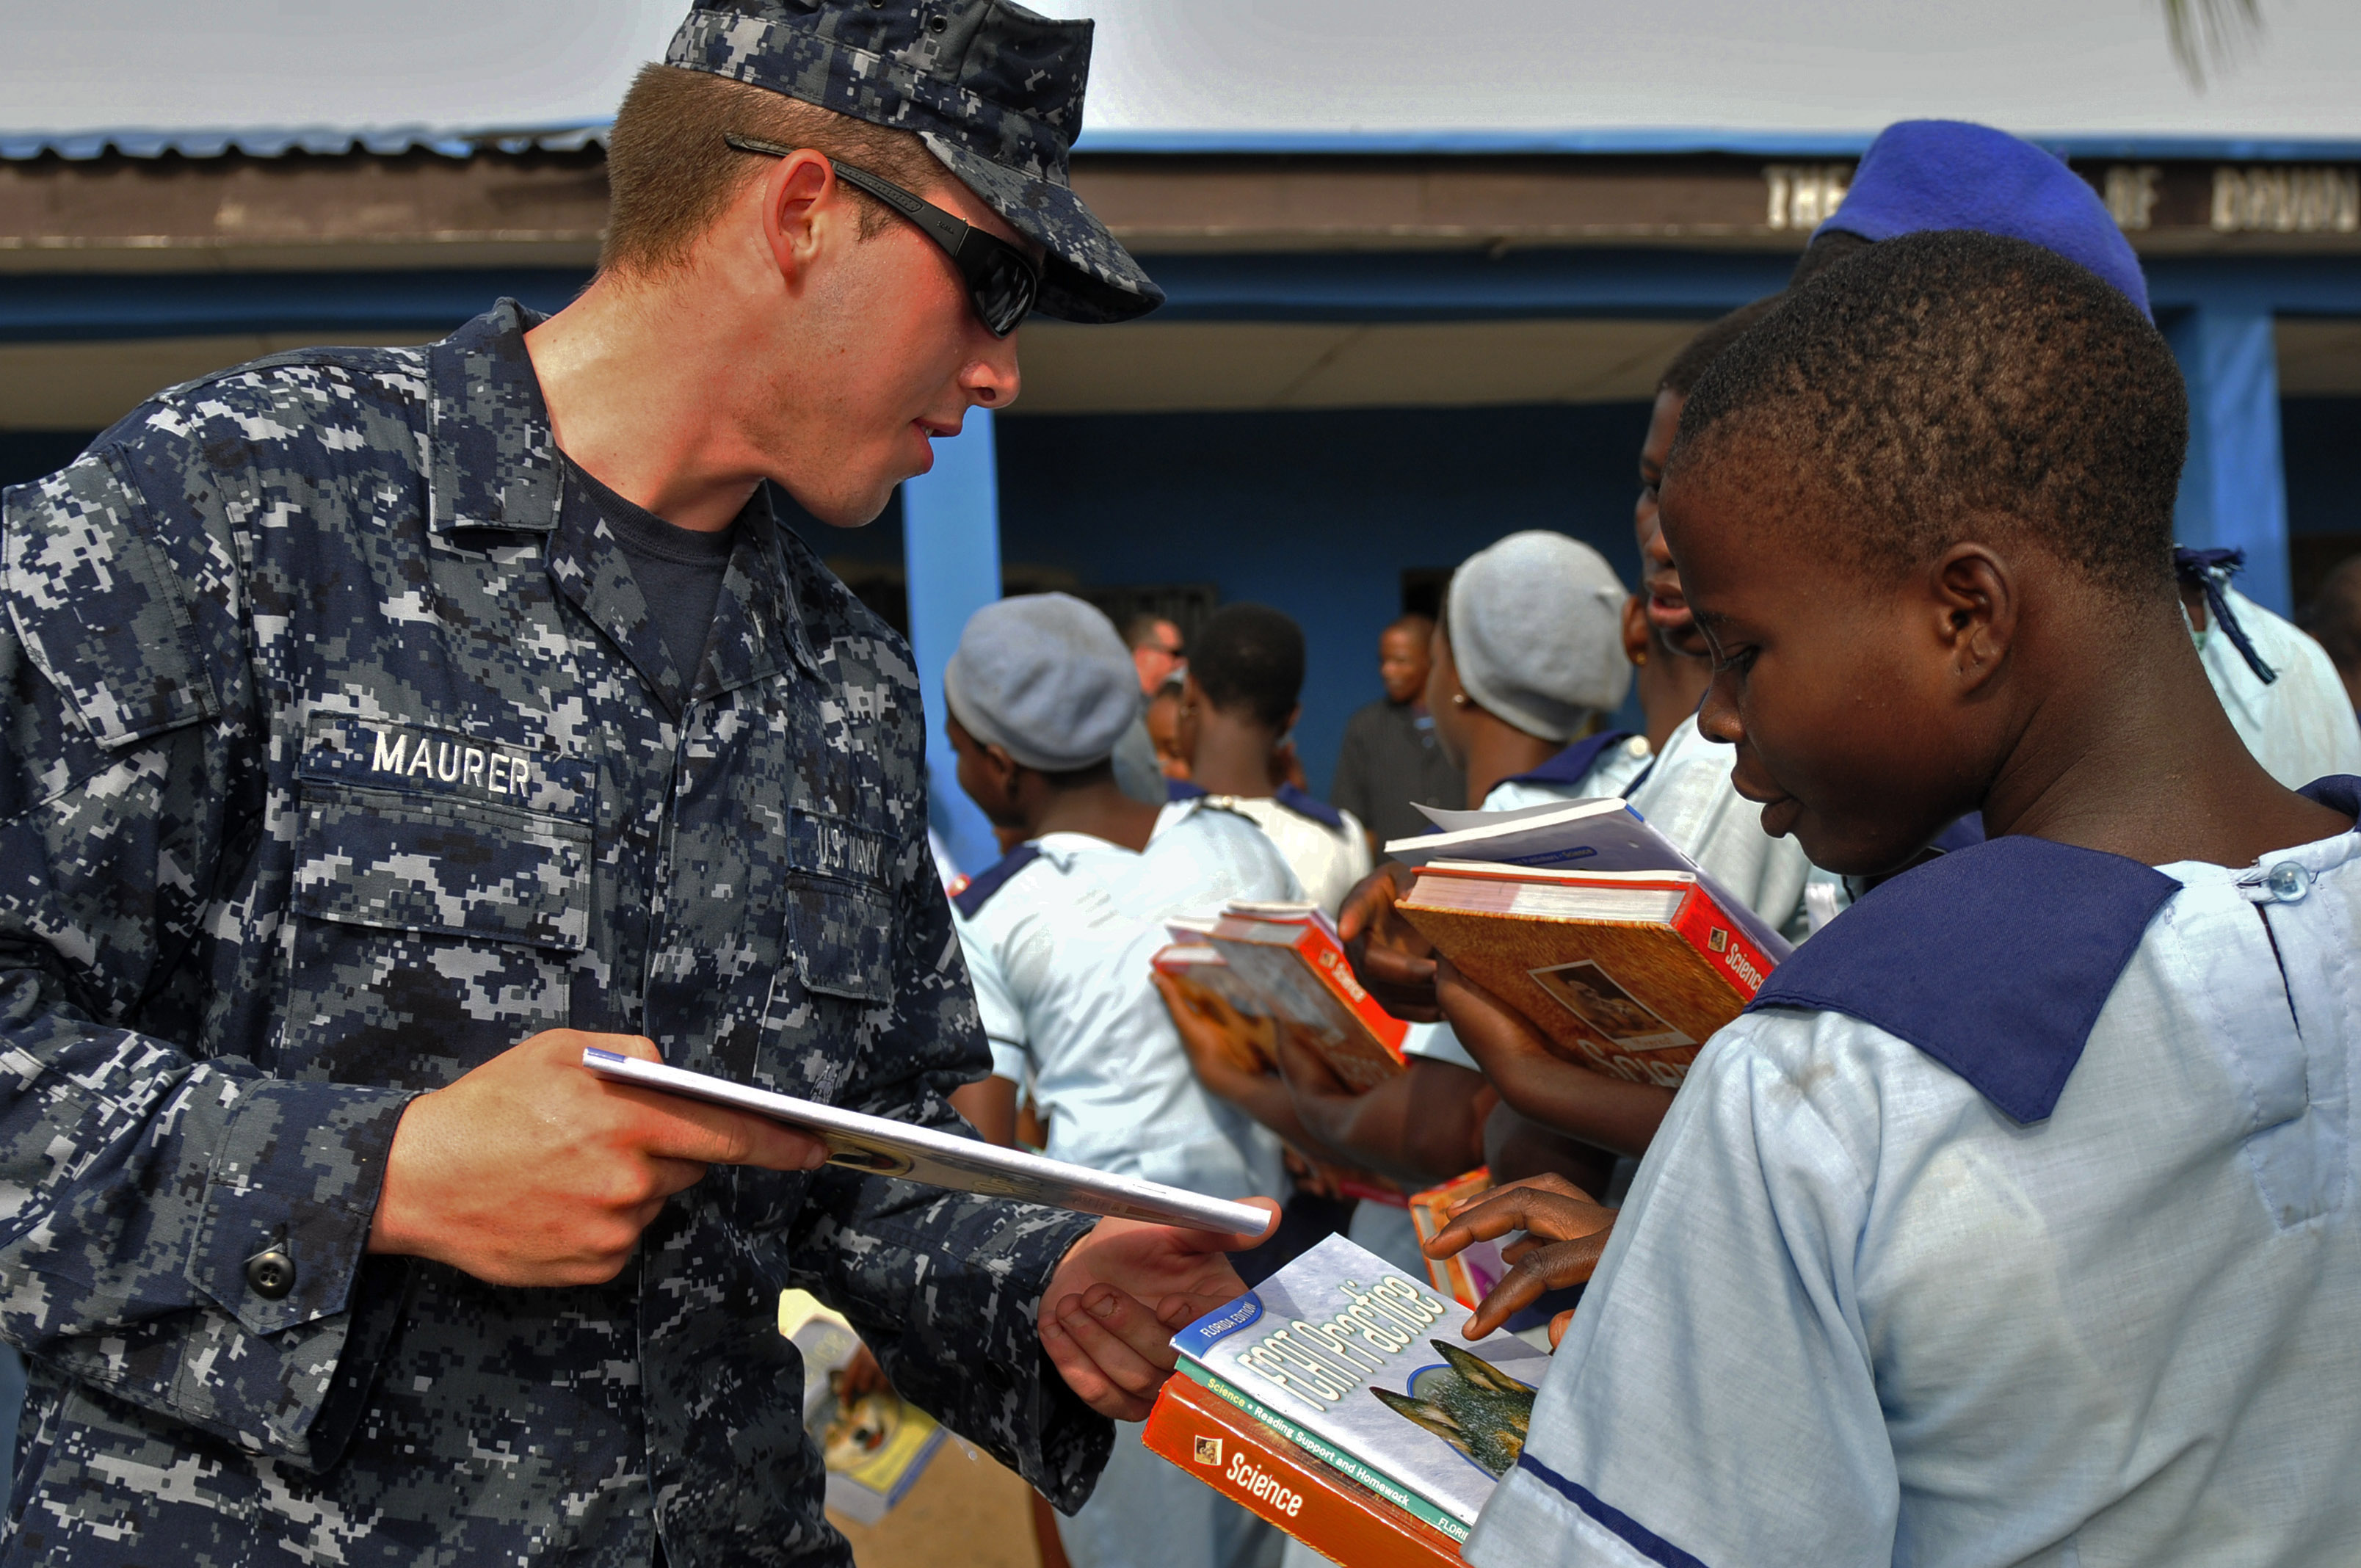 US Navy 120216-N-IZ292-060 Boatswain's Mate Seaman Joshua Maurer, assigned to the guided-missile frigate USS Simpson (FFG 56), hands books to schoo